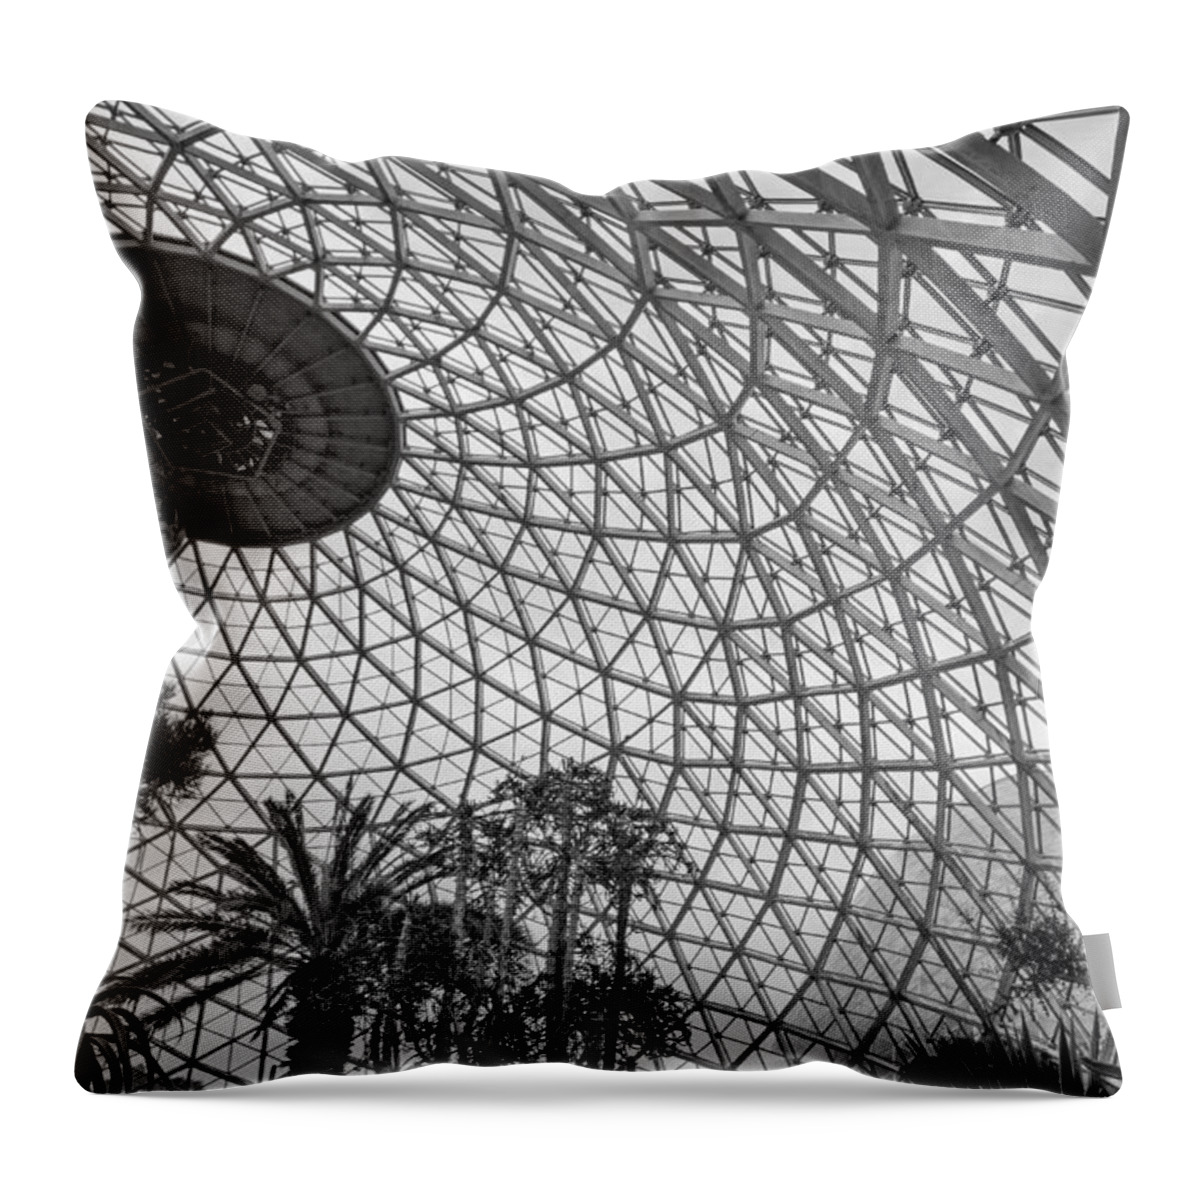 Mitchell Park Conservatory Throw Pillow featuring the photograph Under Dome by Susan McMenamin